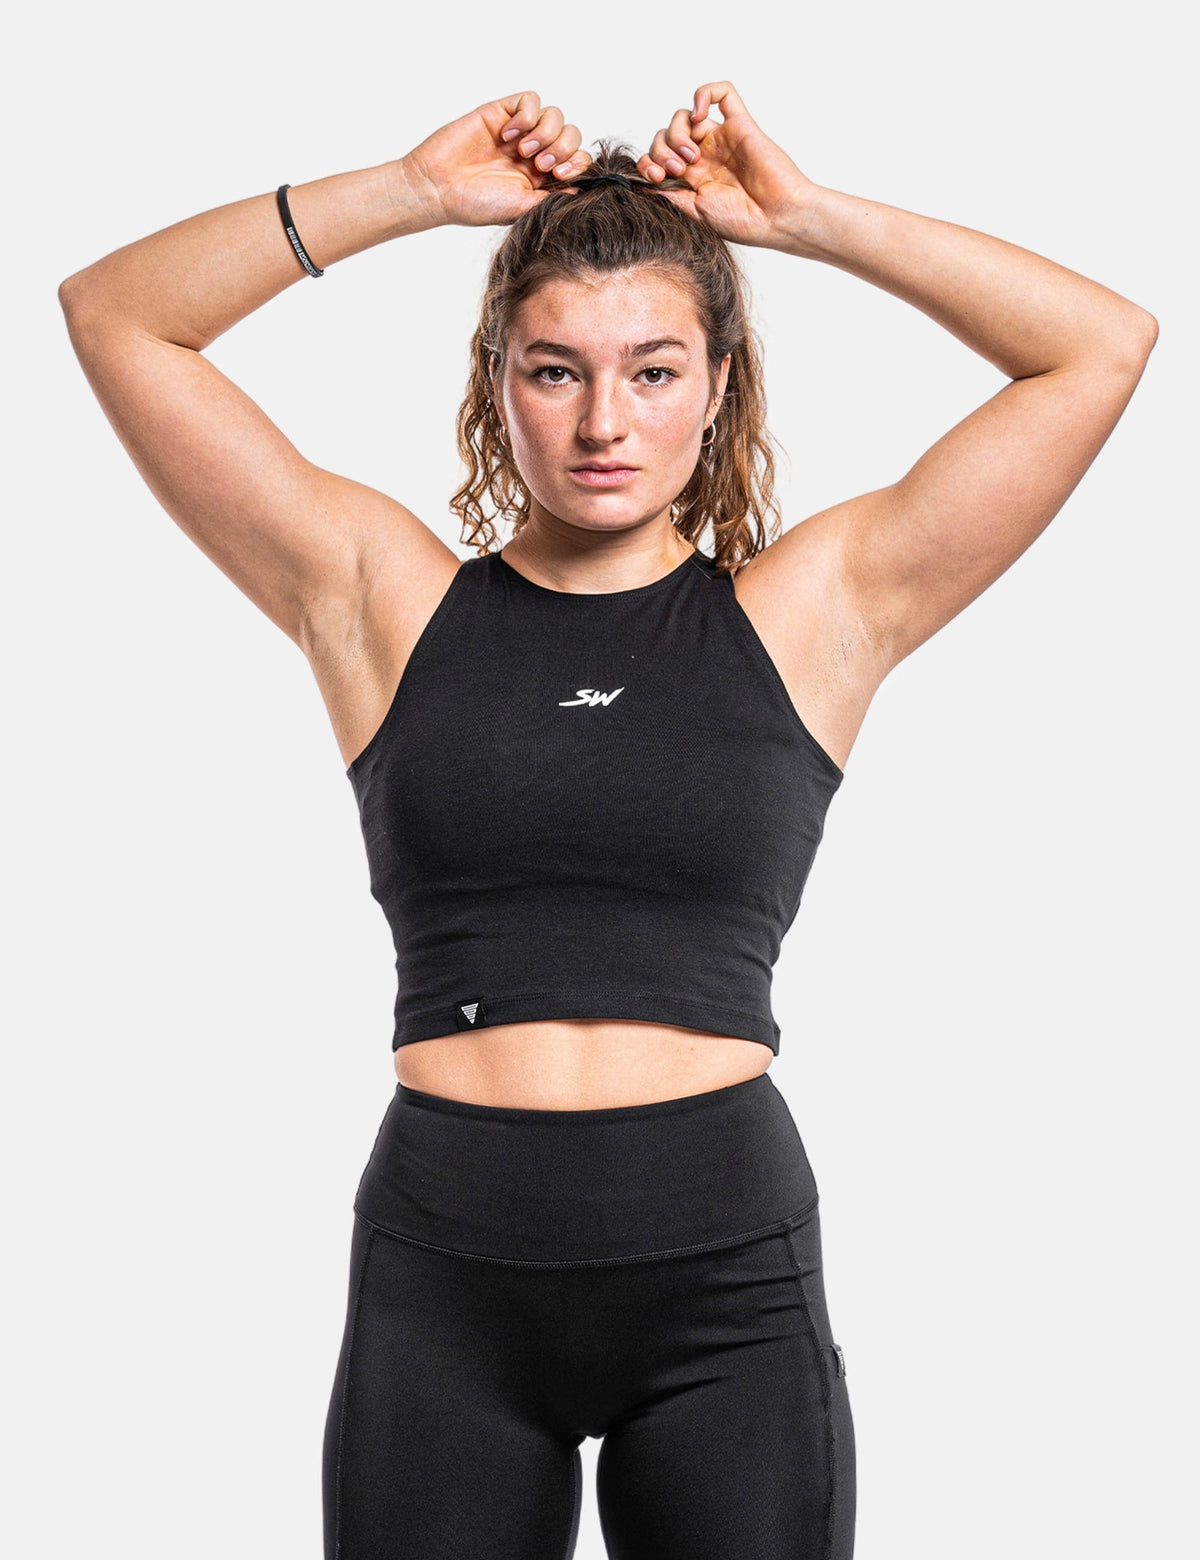 Front View of black Street Workout Crop Top for female calisthenics athletes.